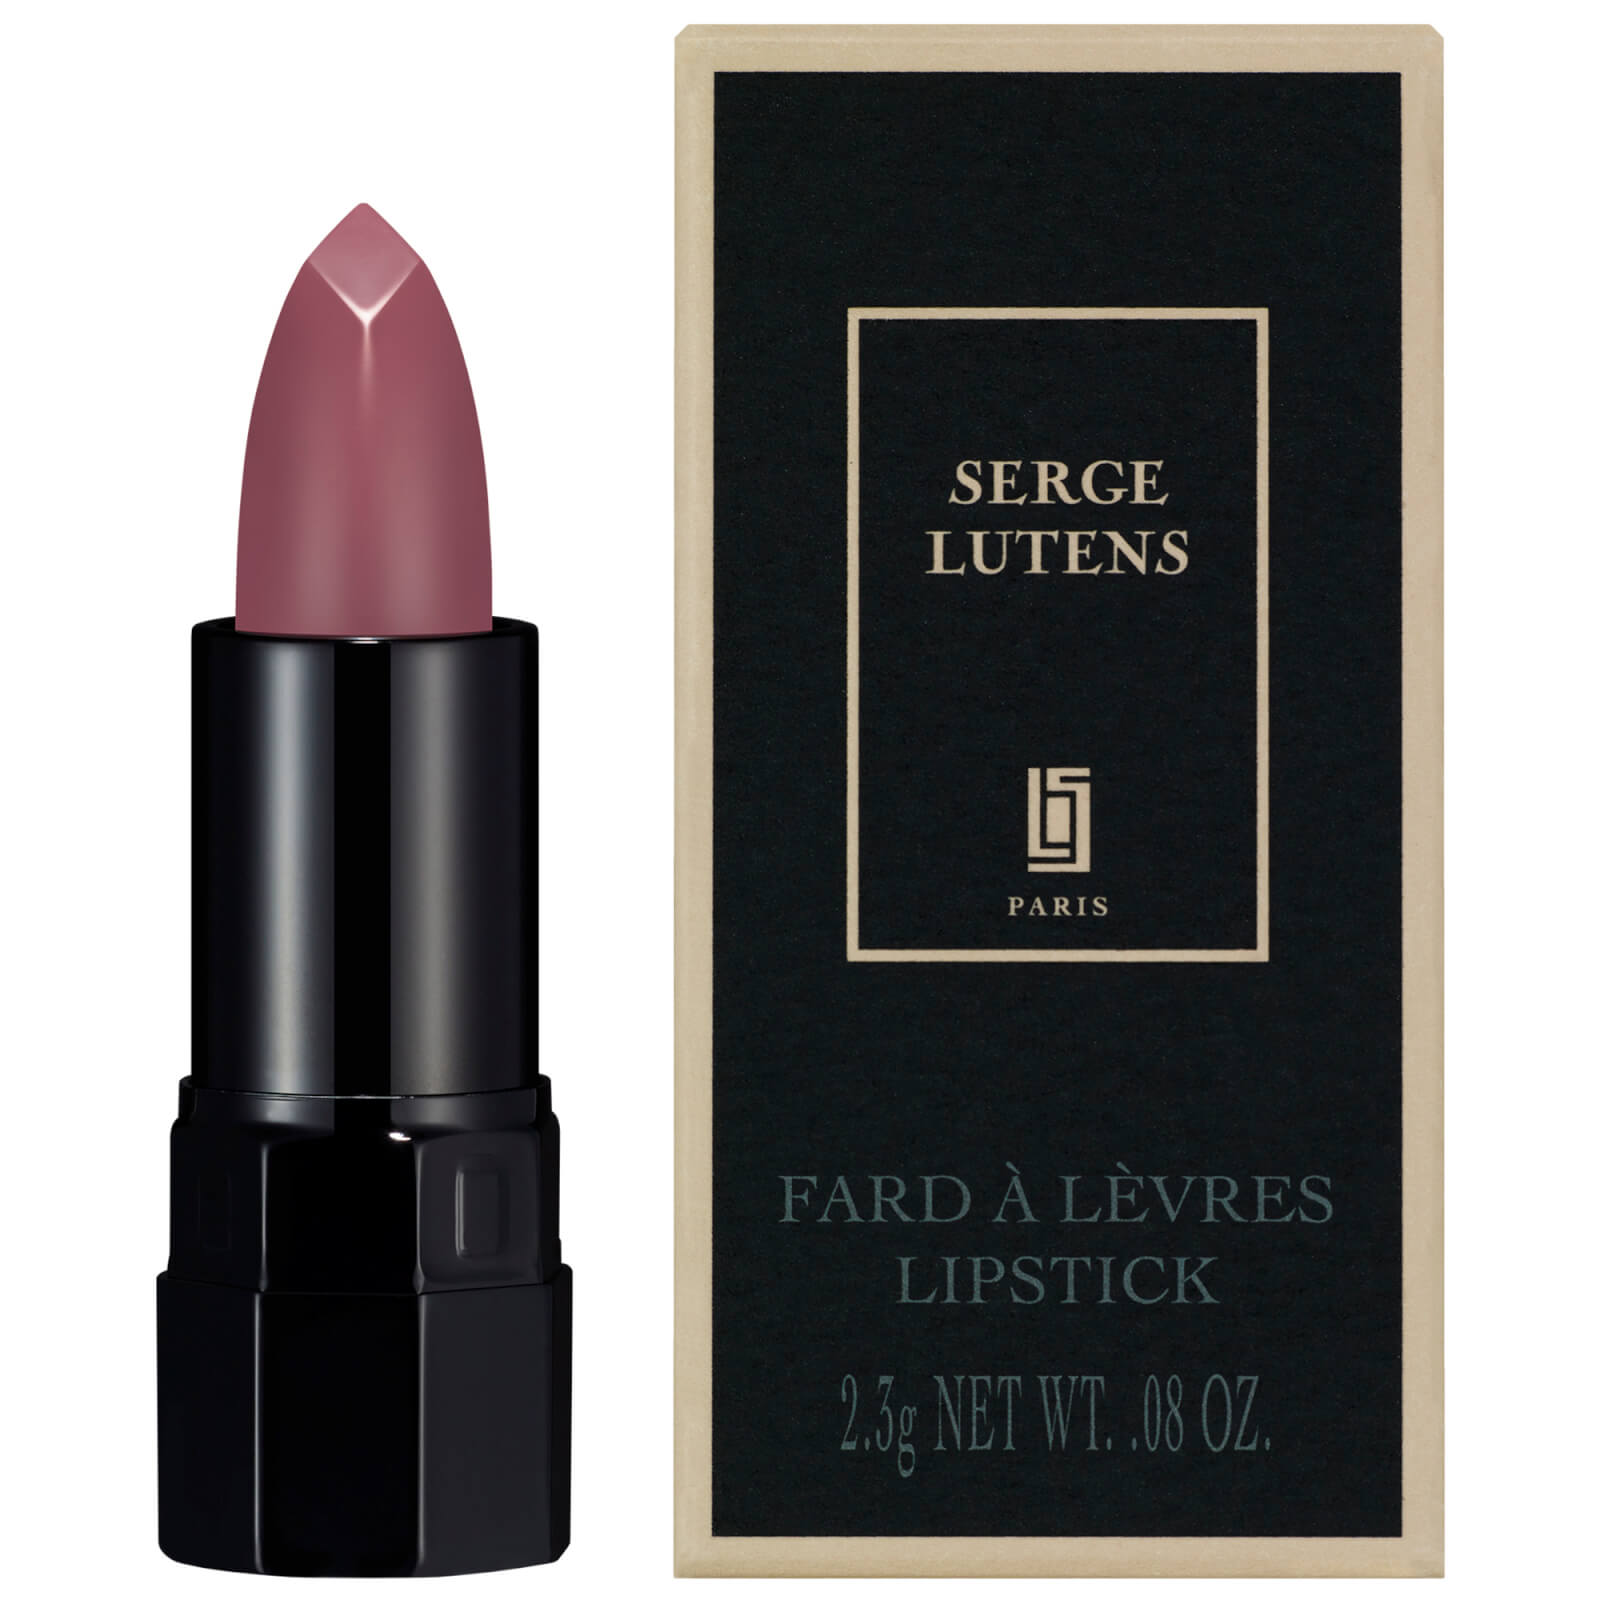 Serge Lutens Fard À Lèvres Lipstick 2.3g (various Shades) - 21 Remords Boomerang In Pink